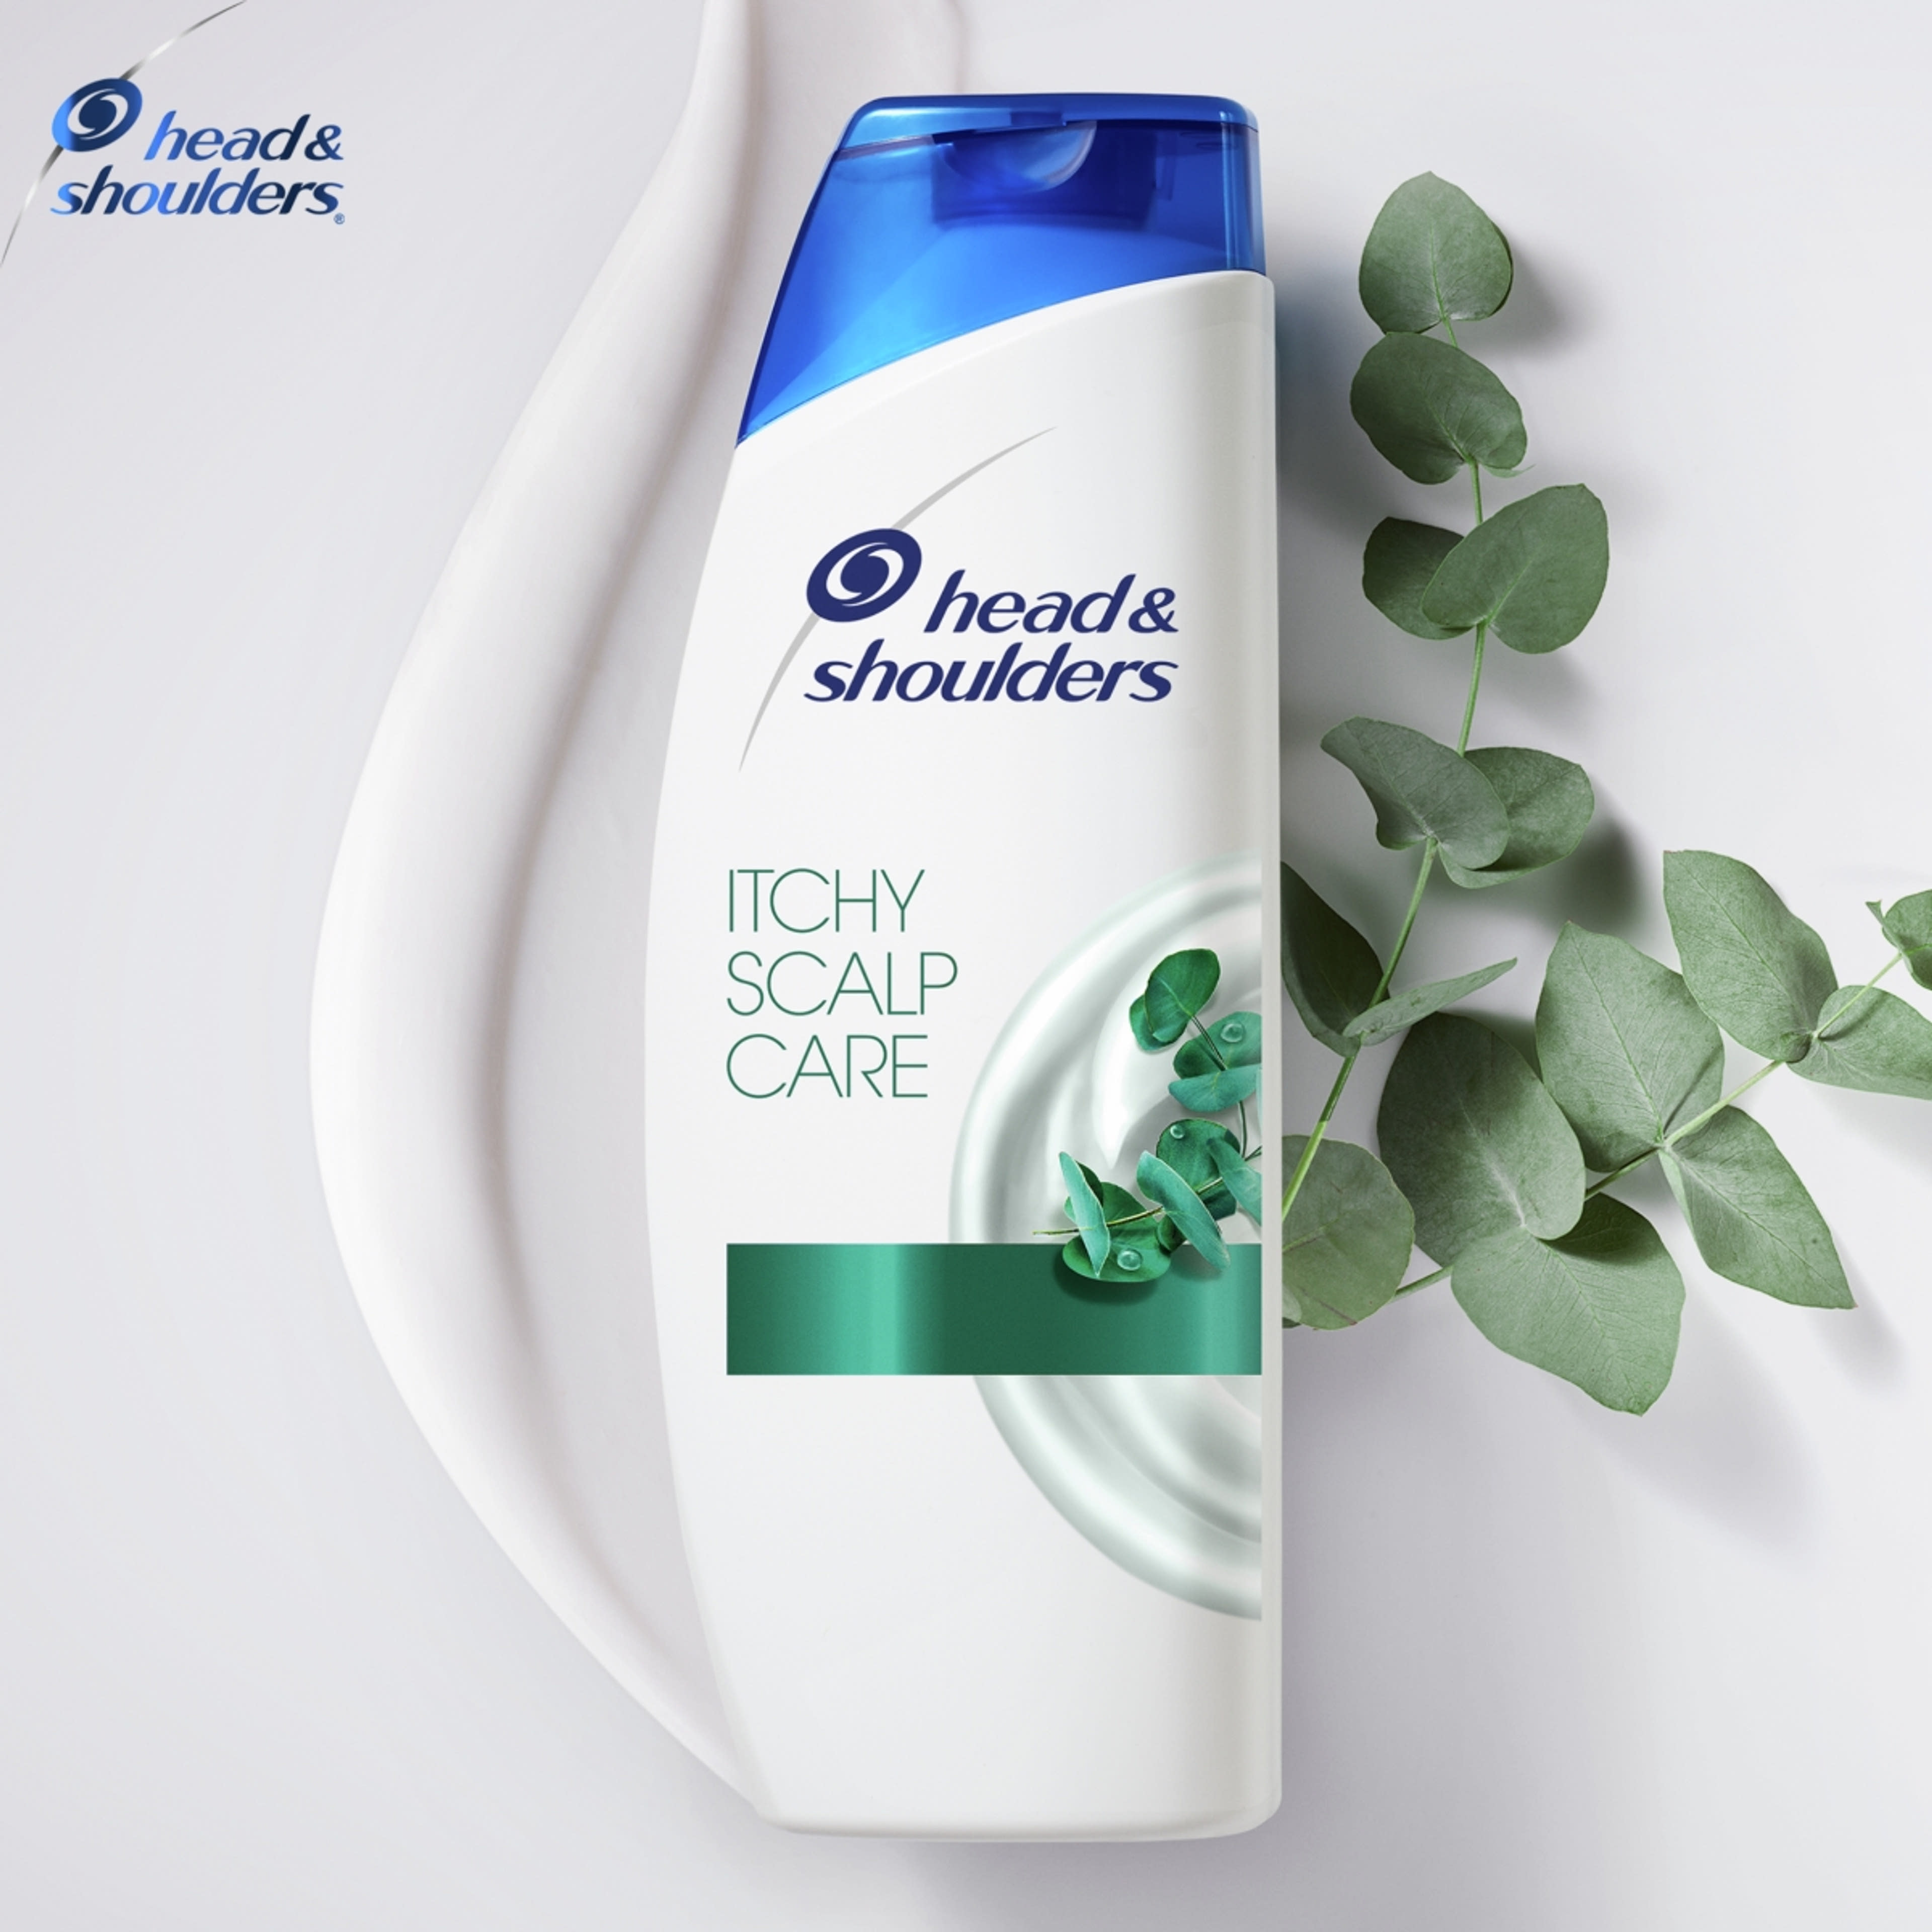 Head & Shoulders Itchy sampon - 400 ml-2